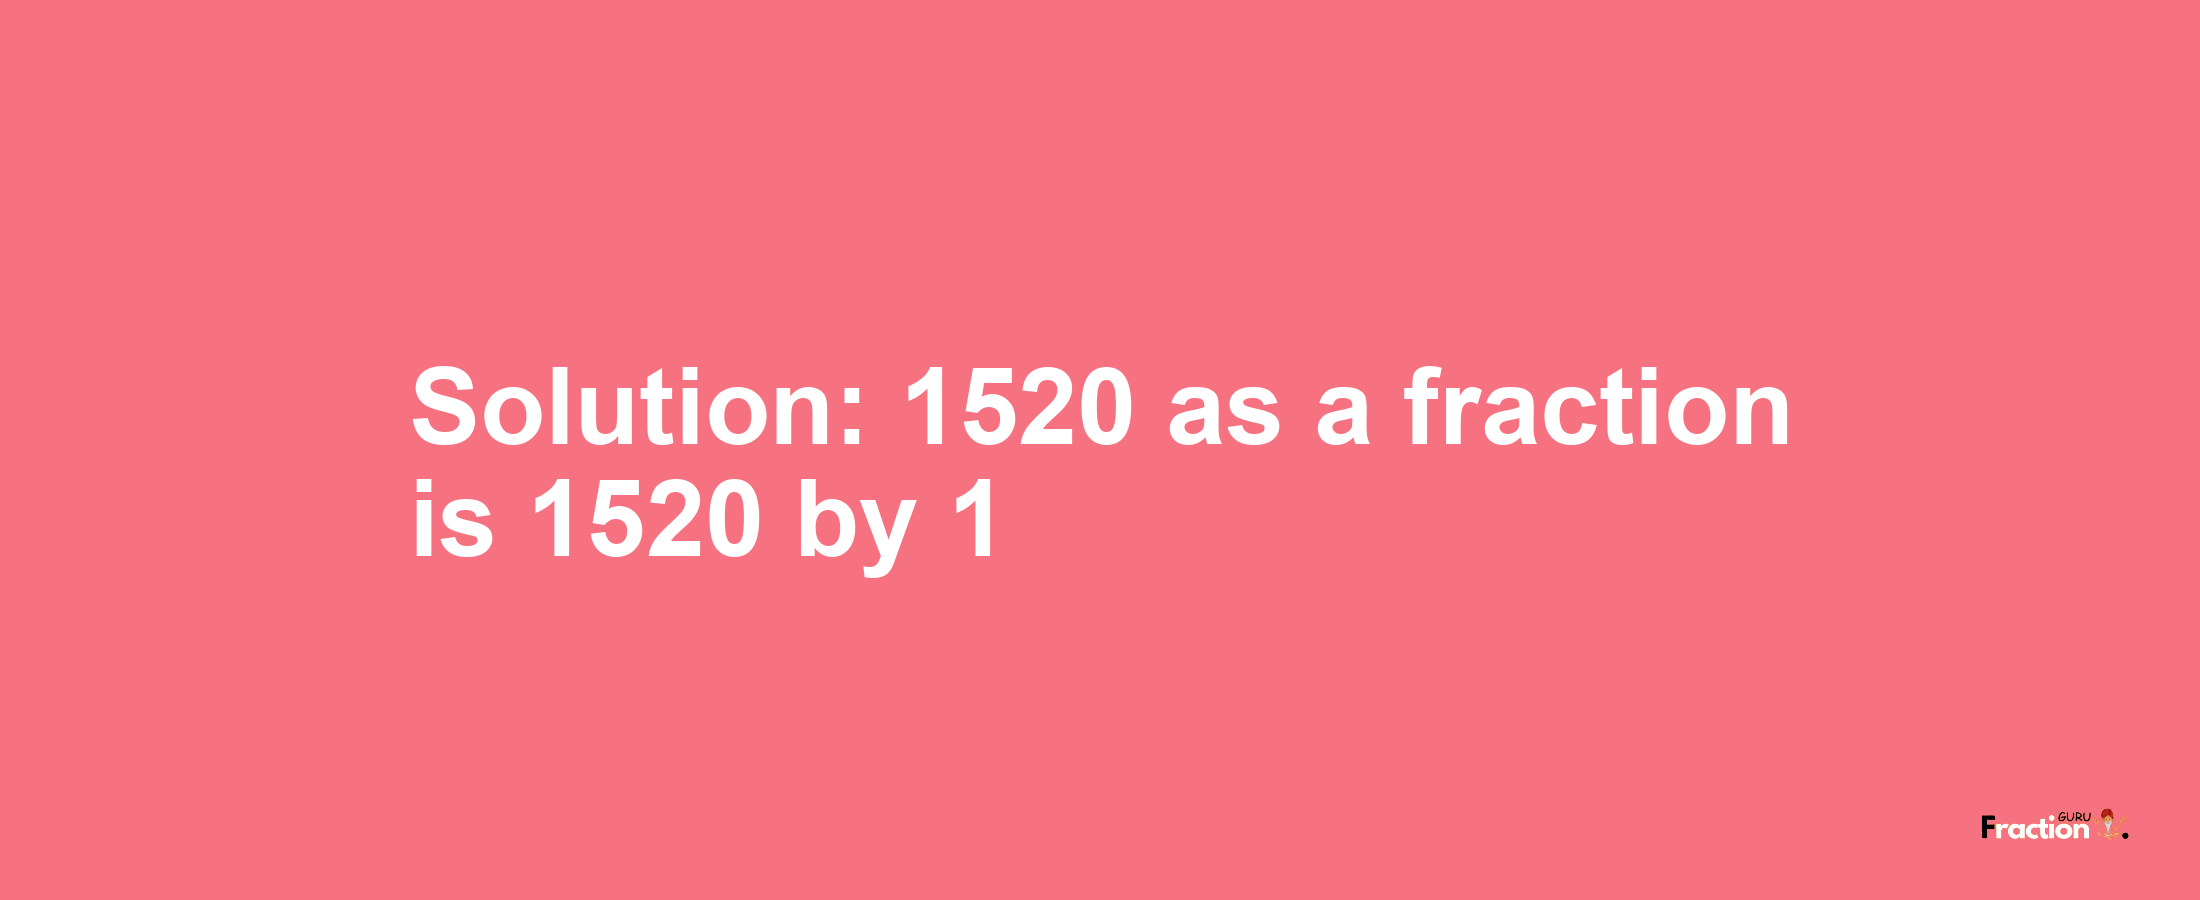 Solution:1520 as a fraction is 1520/1